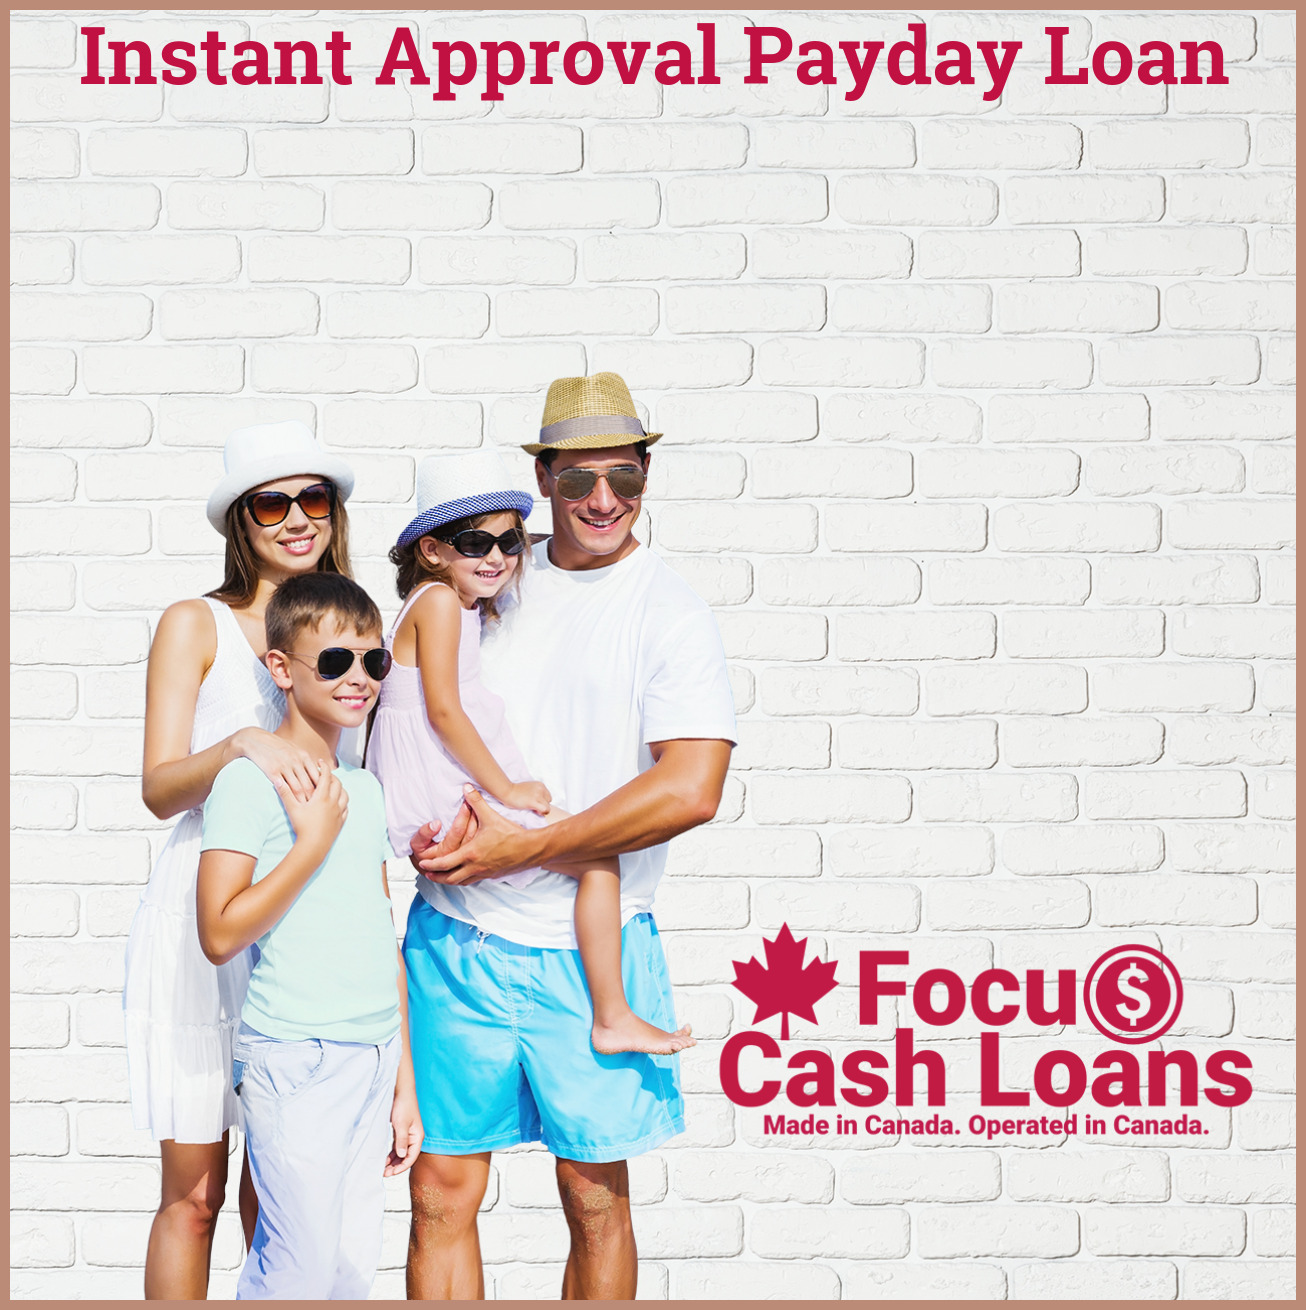 Approval Payday Loan